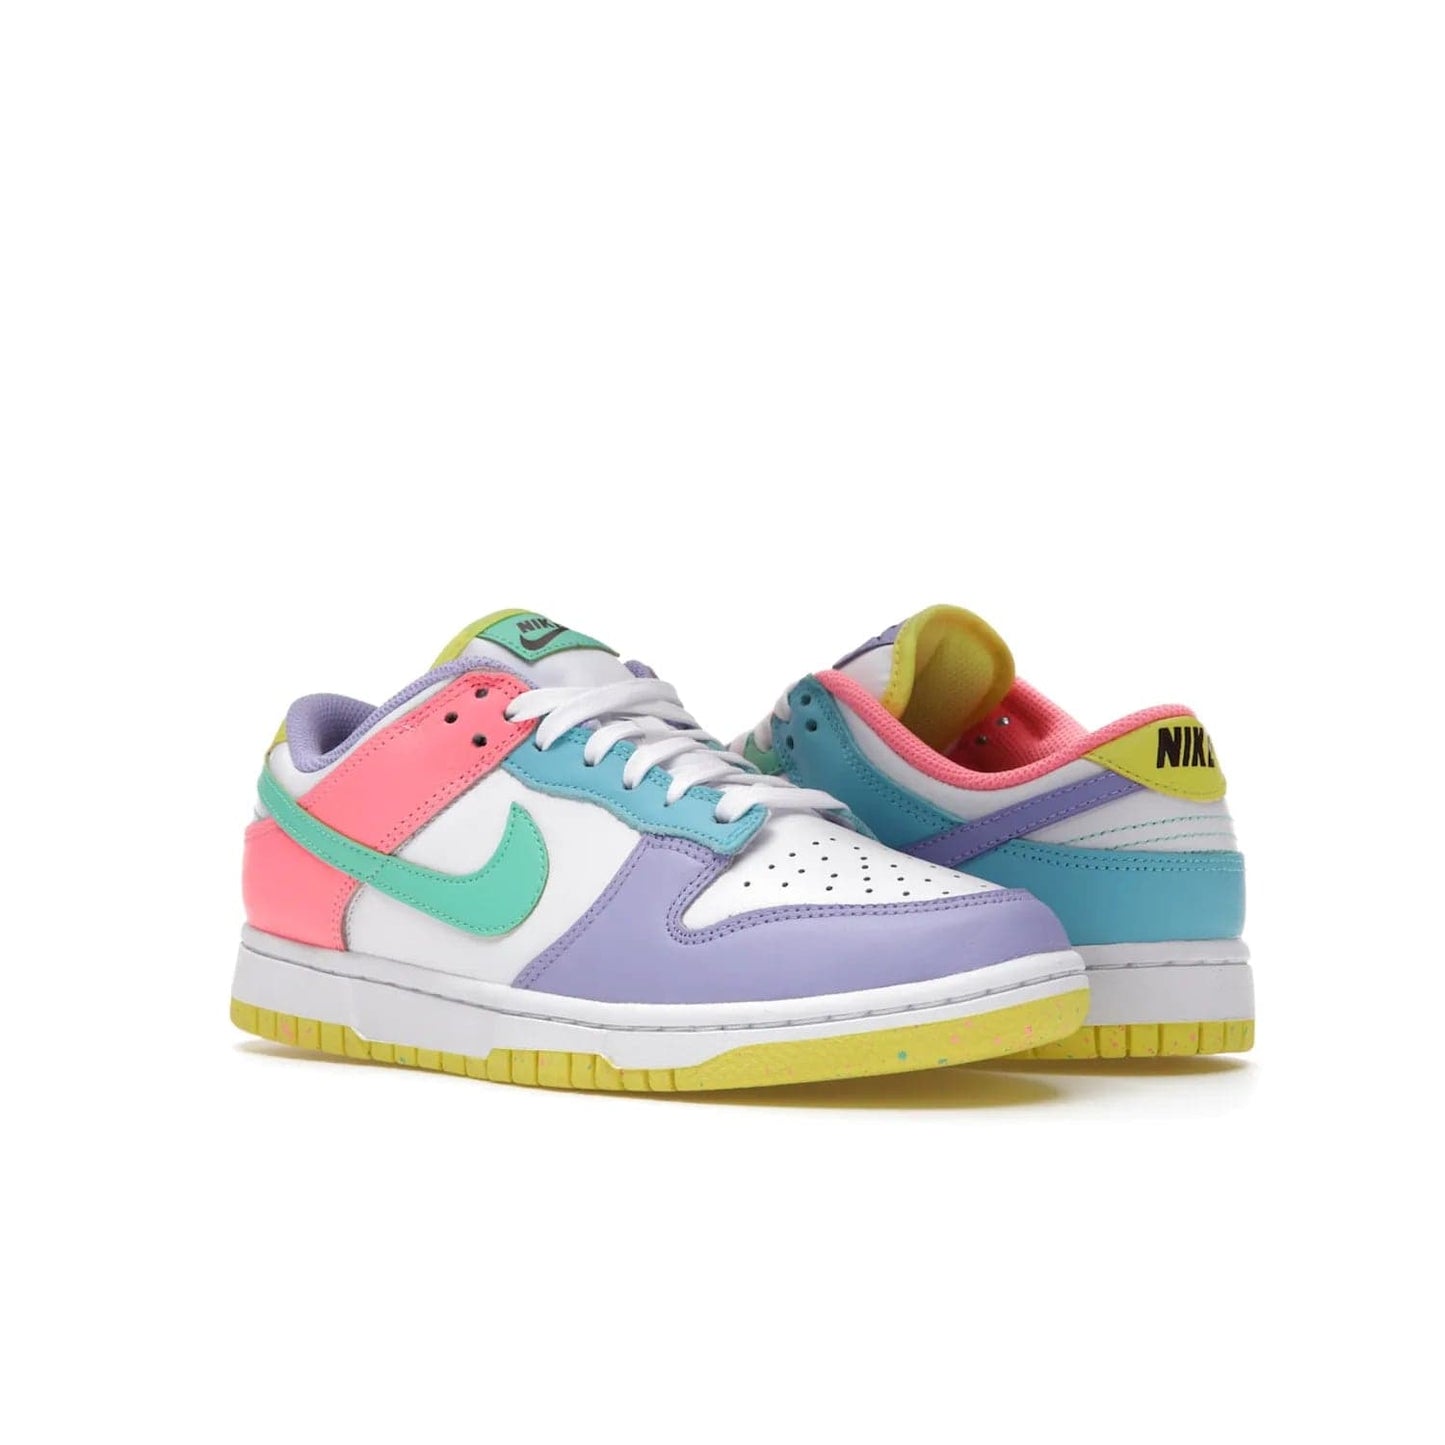 Nike Dunk Low SE Easter Candy (Women's) - Image 5 - Only at www.BallersClubKickz.com - UP
The Nike Dunk Low SE Easter Candy (Women's) brings a stylish touch to any outfit with its white leather upper, colorful accents, and multicolor speckle detailing. Shop now before they're gone.